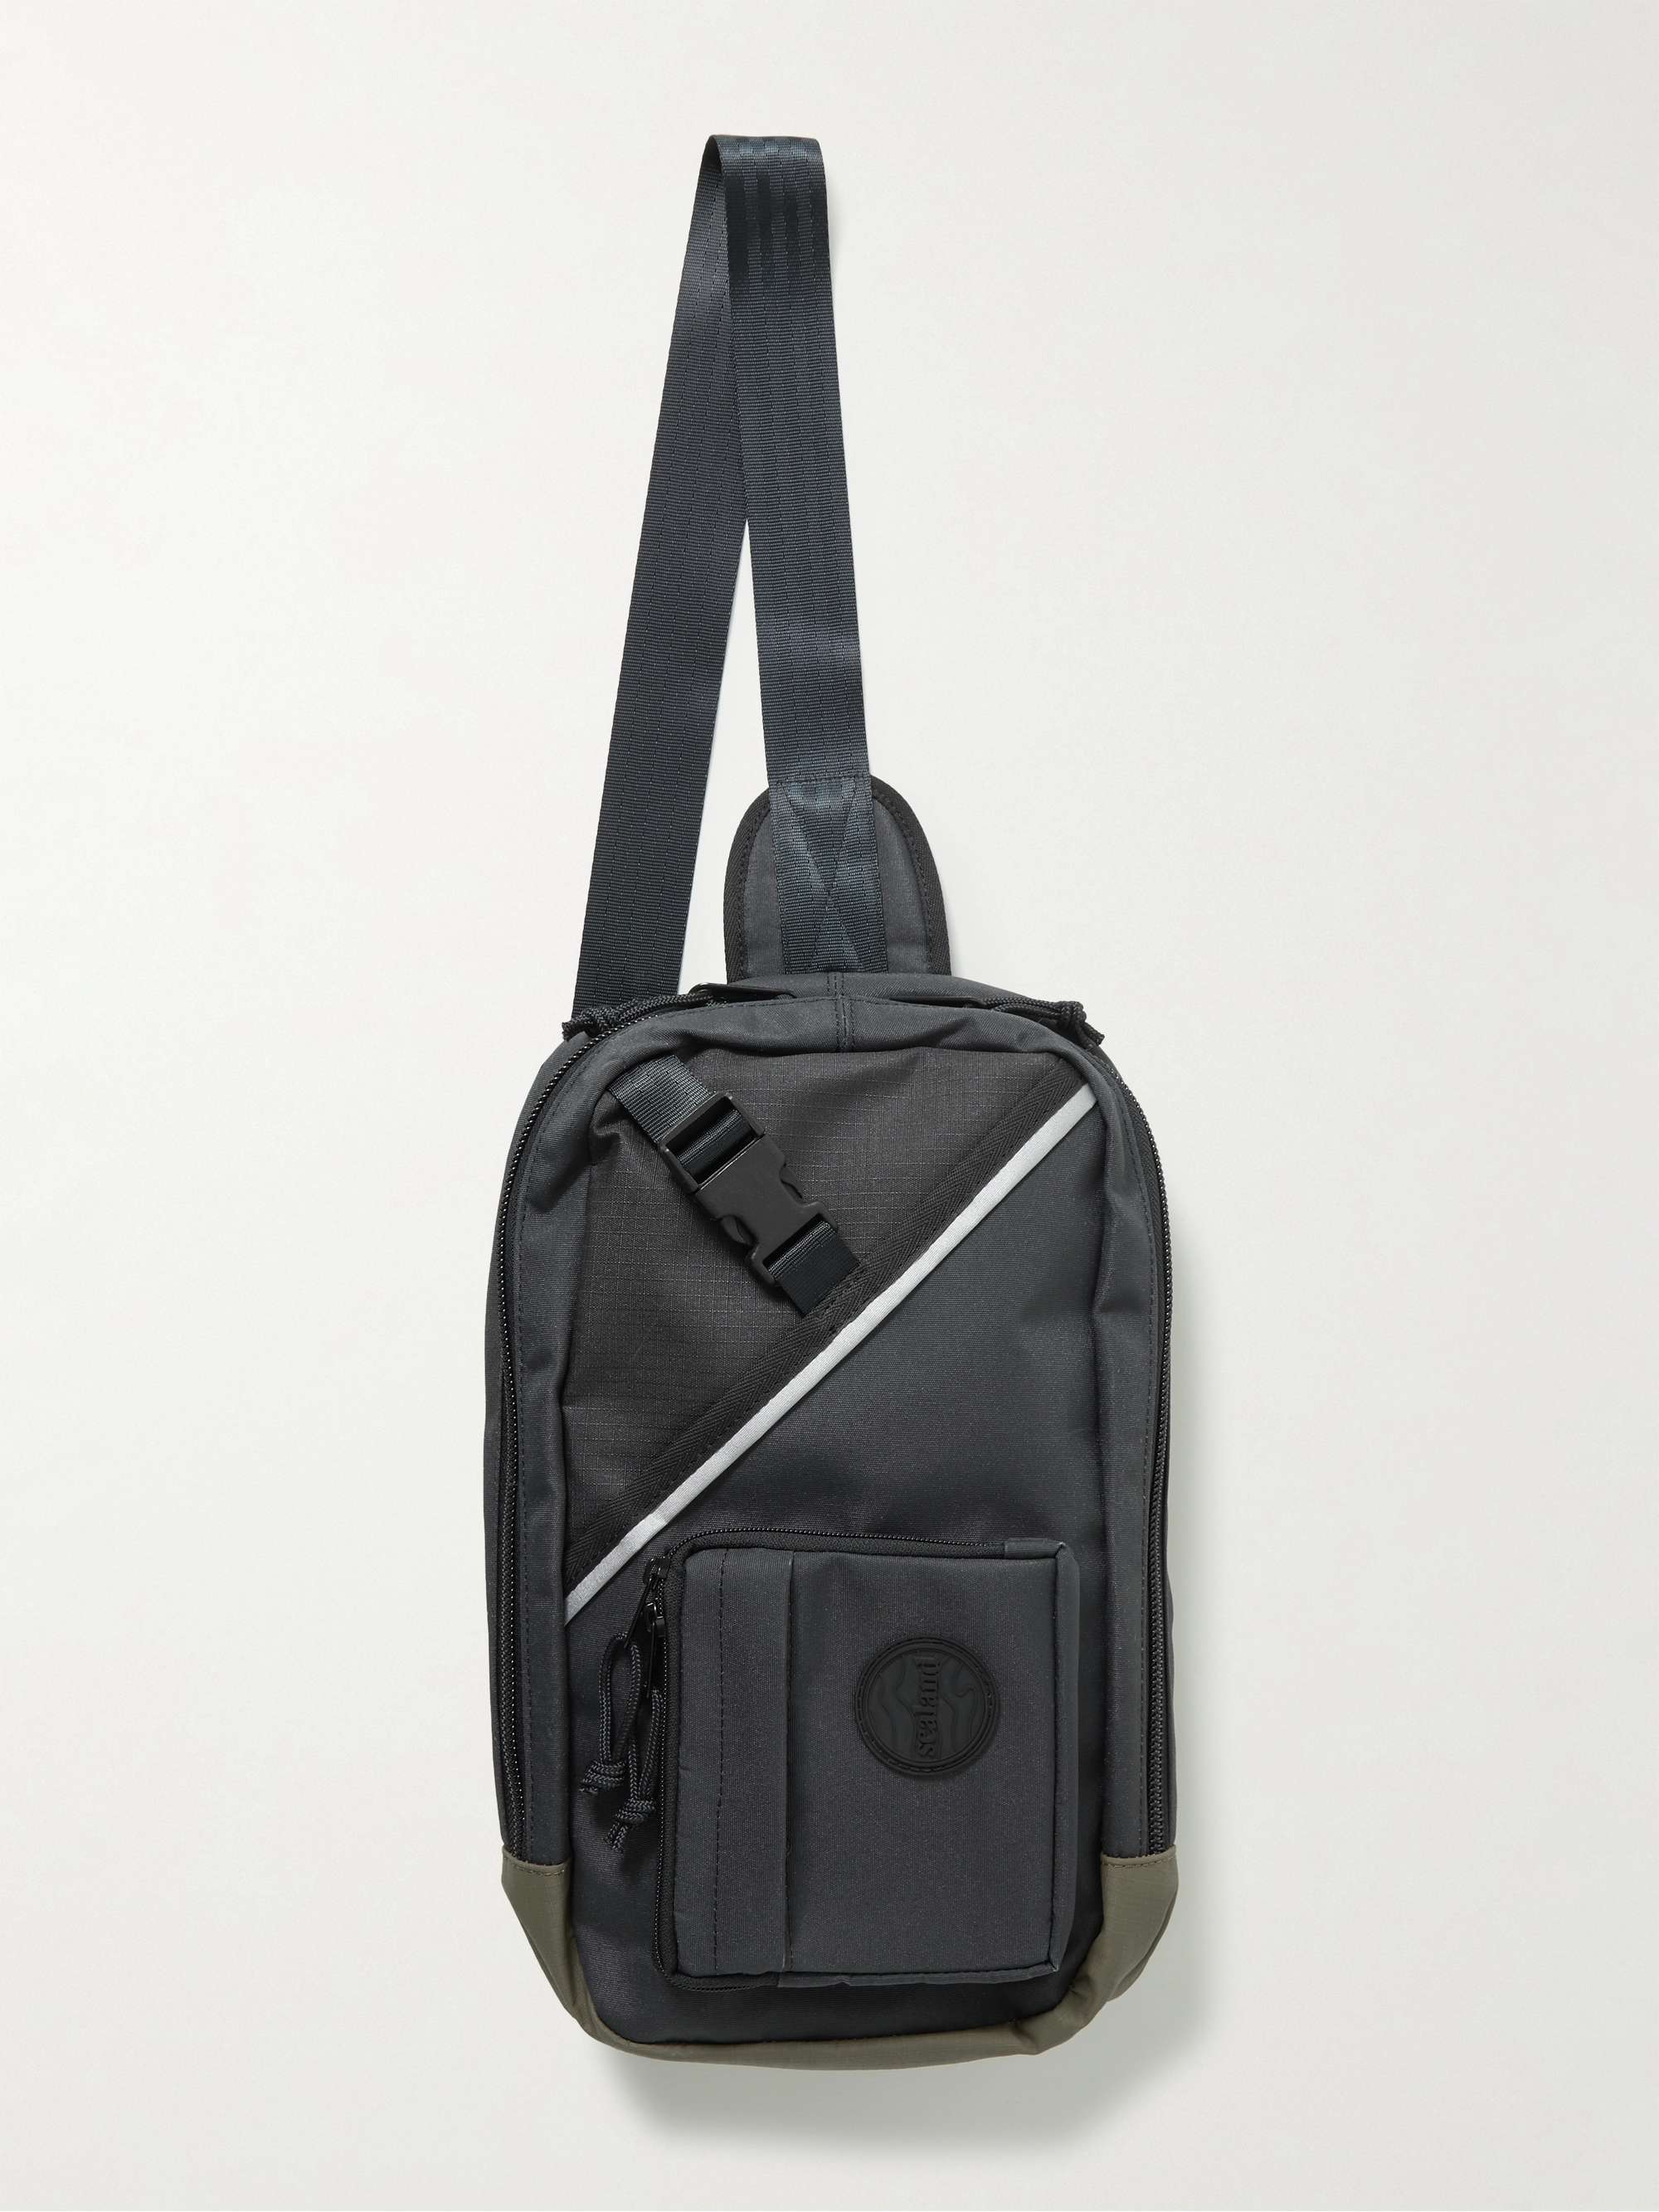 SEALAND GEAR Bloc Colour-Block Upcycled Canvas and Ripstop Sling Backpack